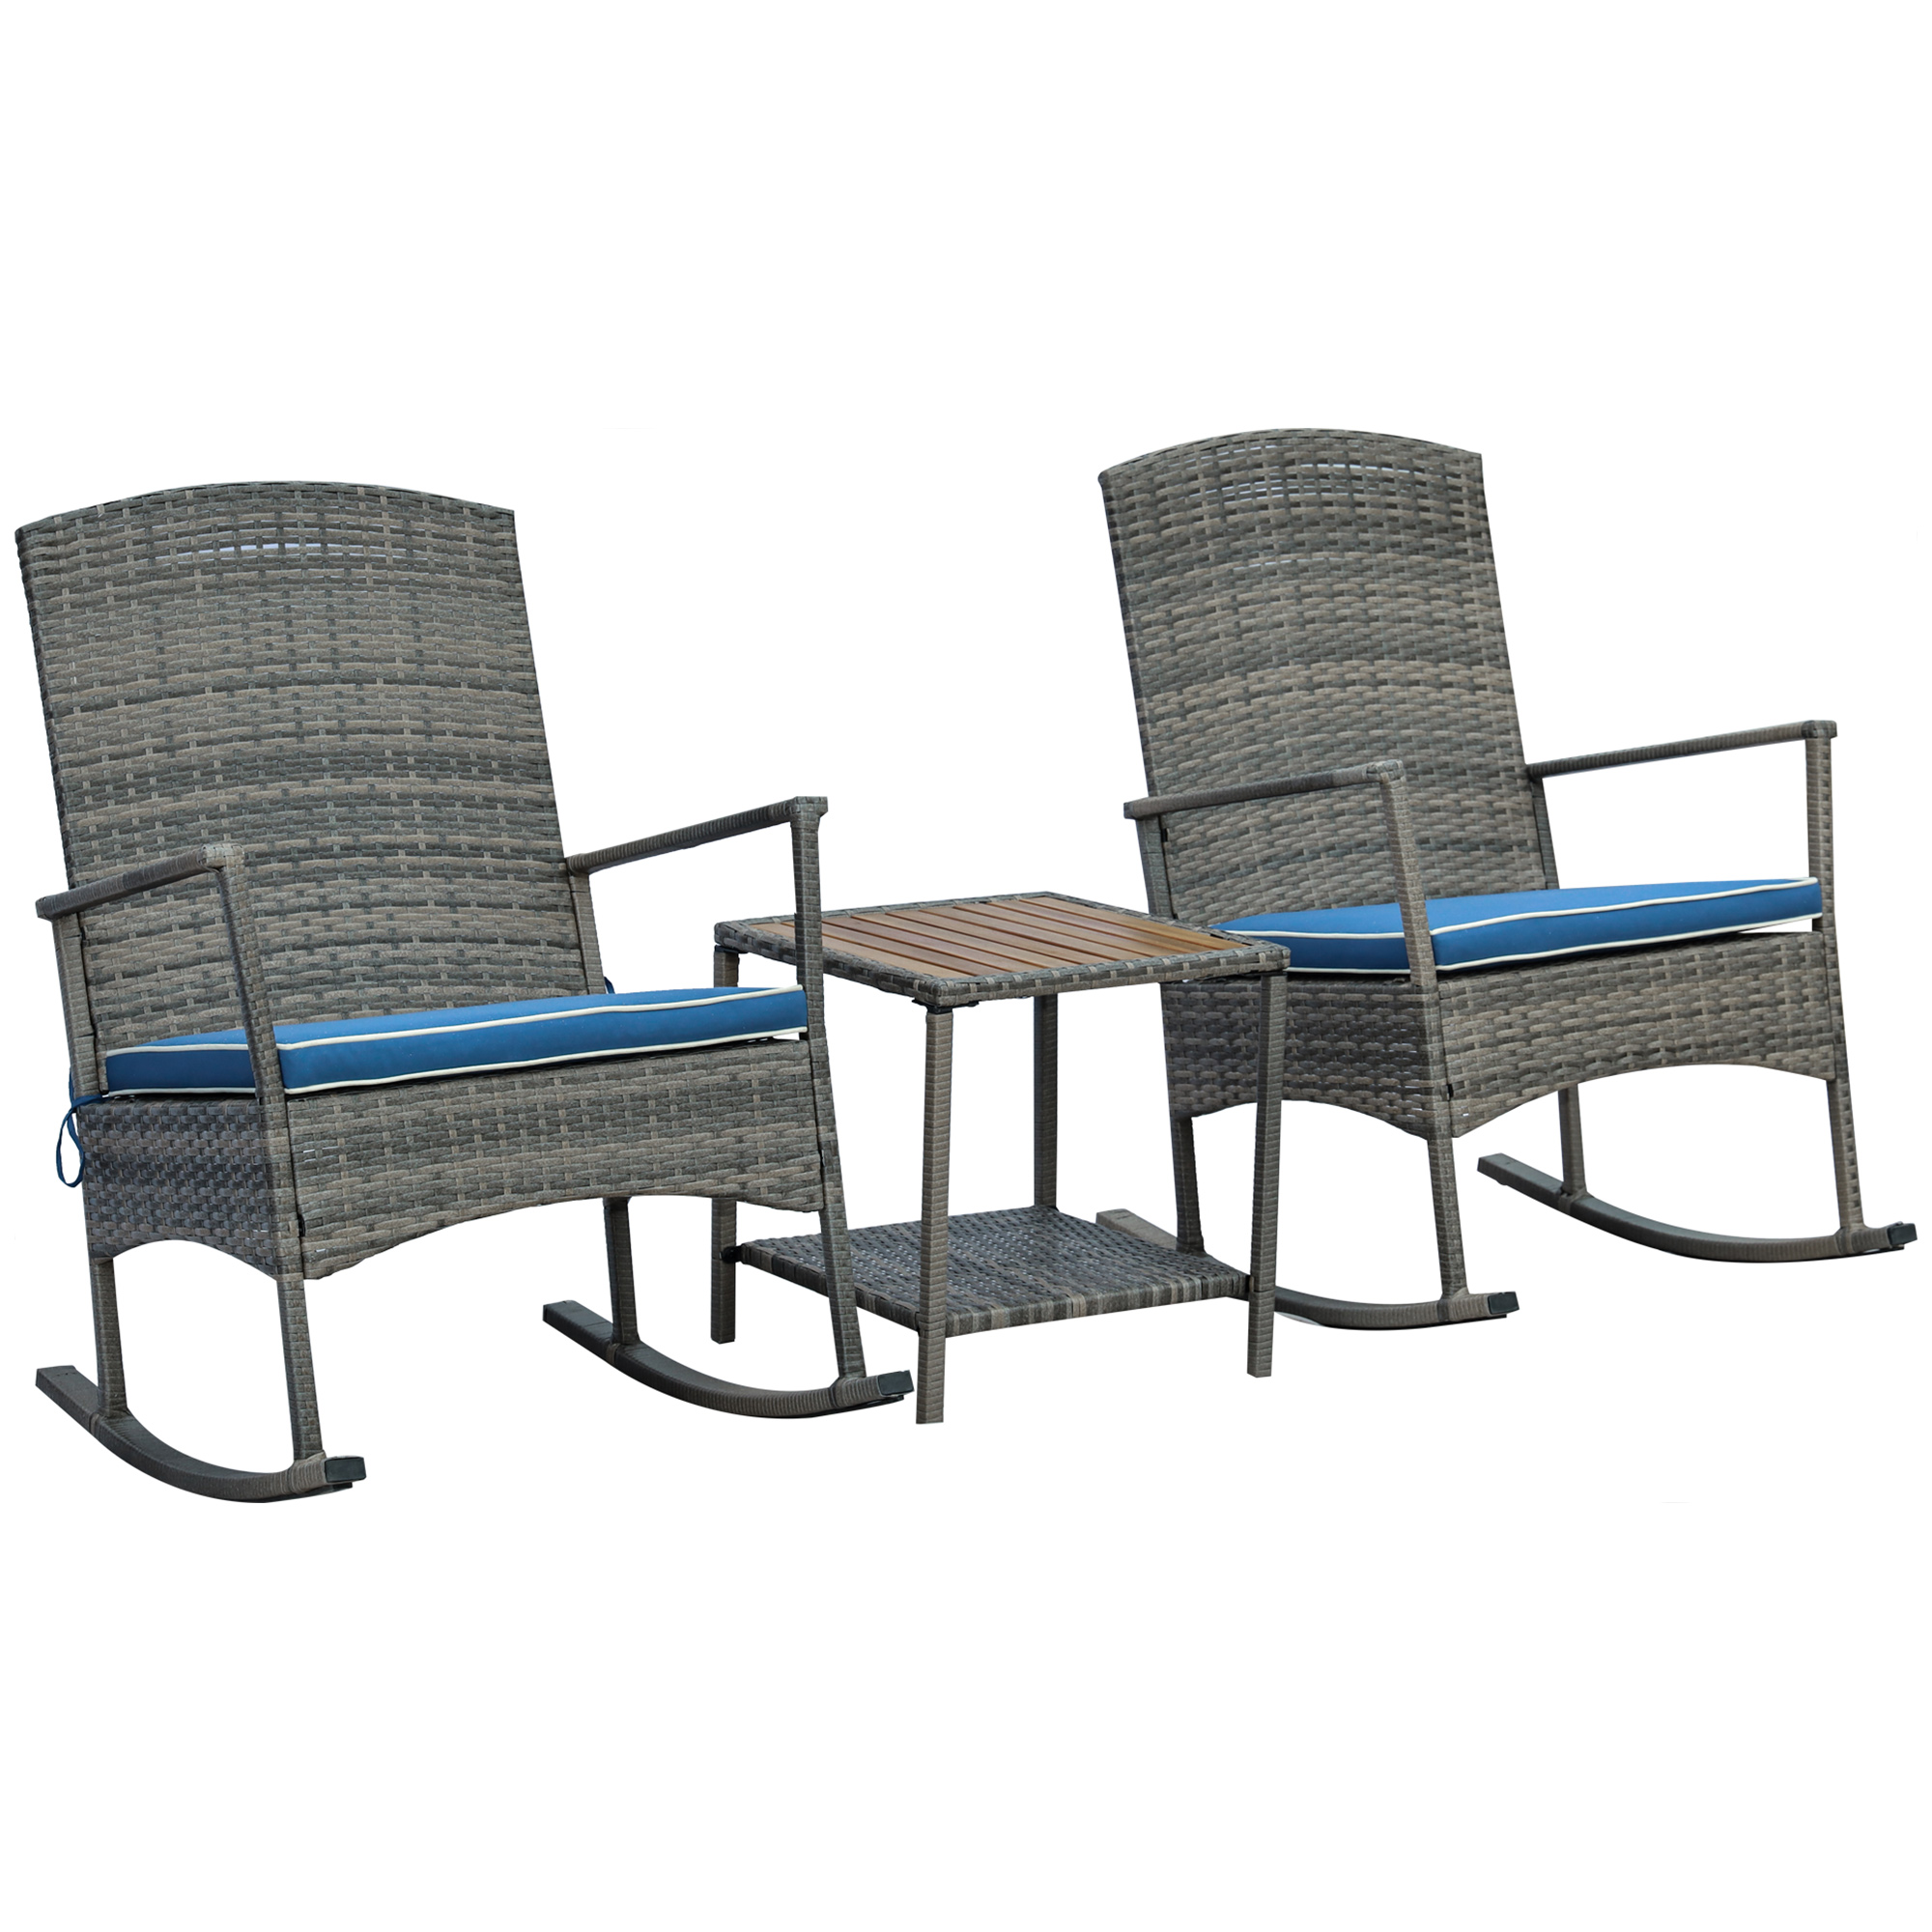 Outsunny 3 Piece Outdoor PE Rattan Rocking Chair Set, Patio Wicker Recliner Rocker Chair with Soft Cushion & Nature Wood Top Coffee Table, for Garden Backyard Porch, Blue - image 1 of 9